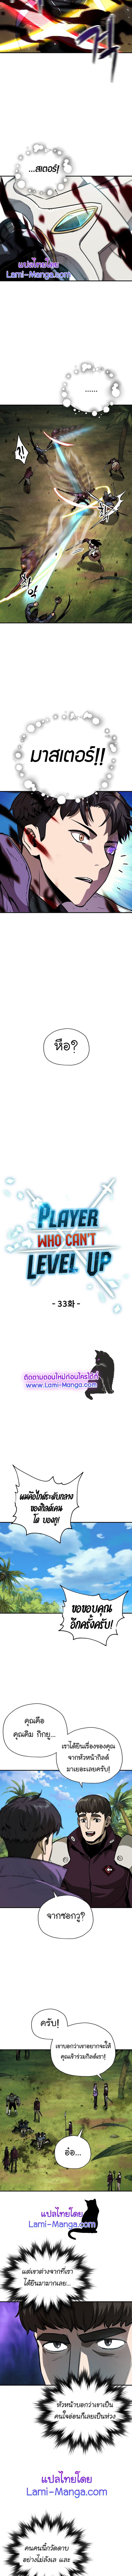 Player Who Can’t Level Up 33 03